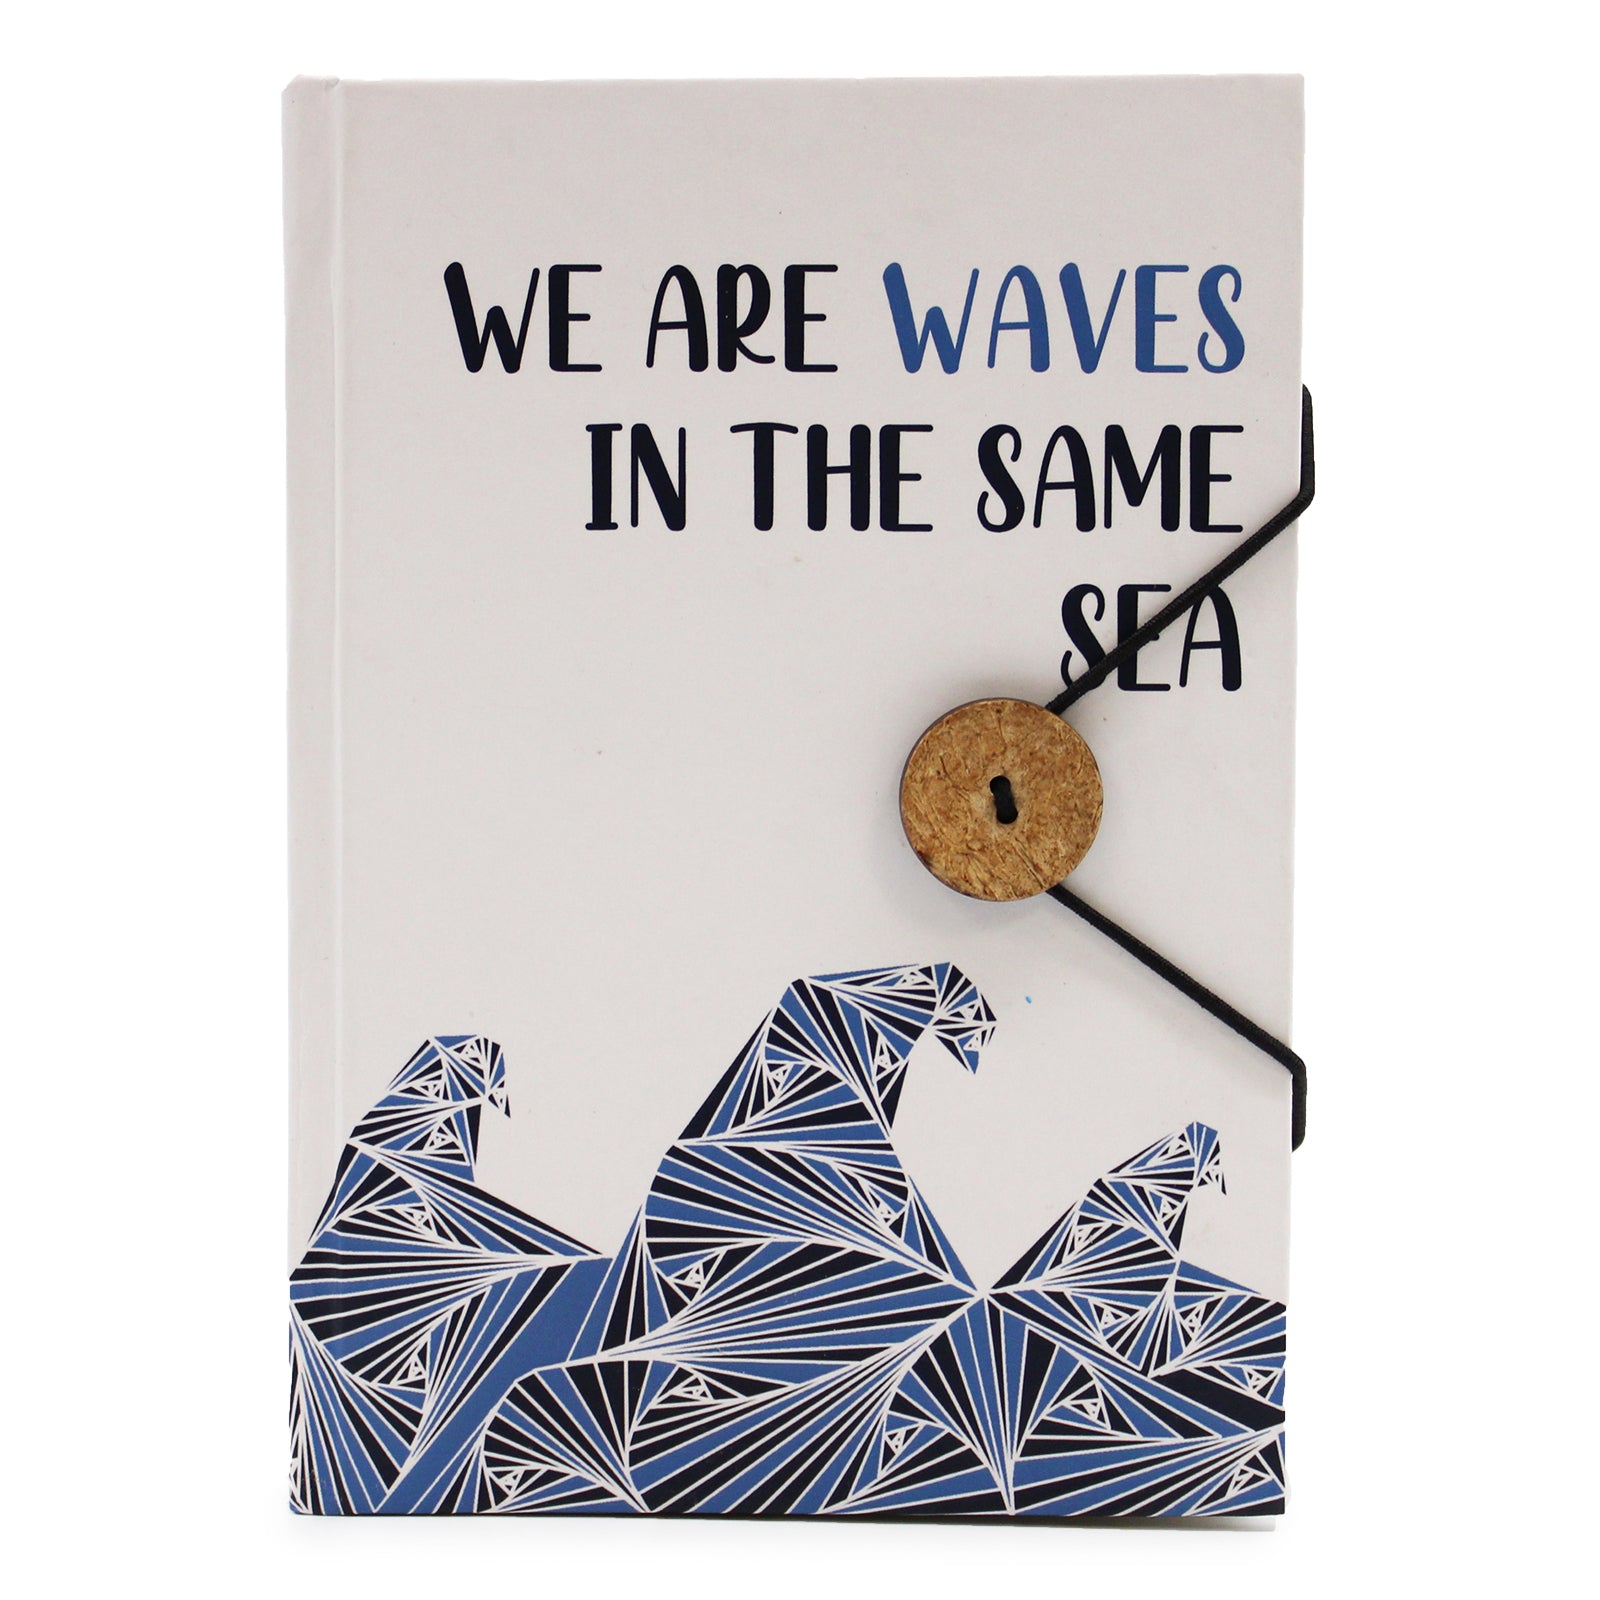 View Notebook with strap Waves in the same sea information